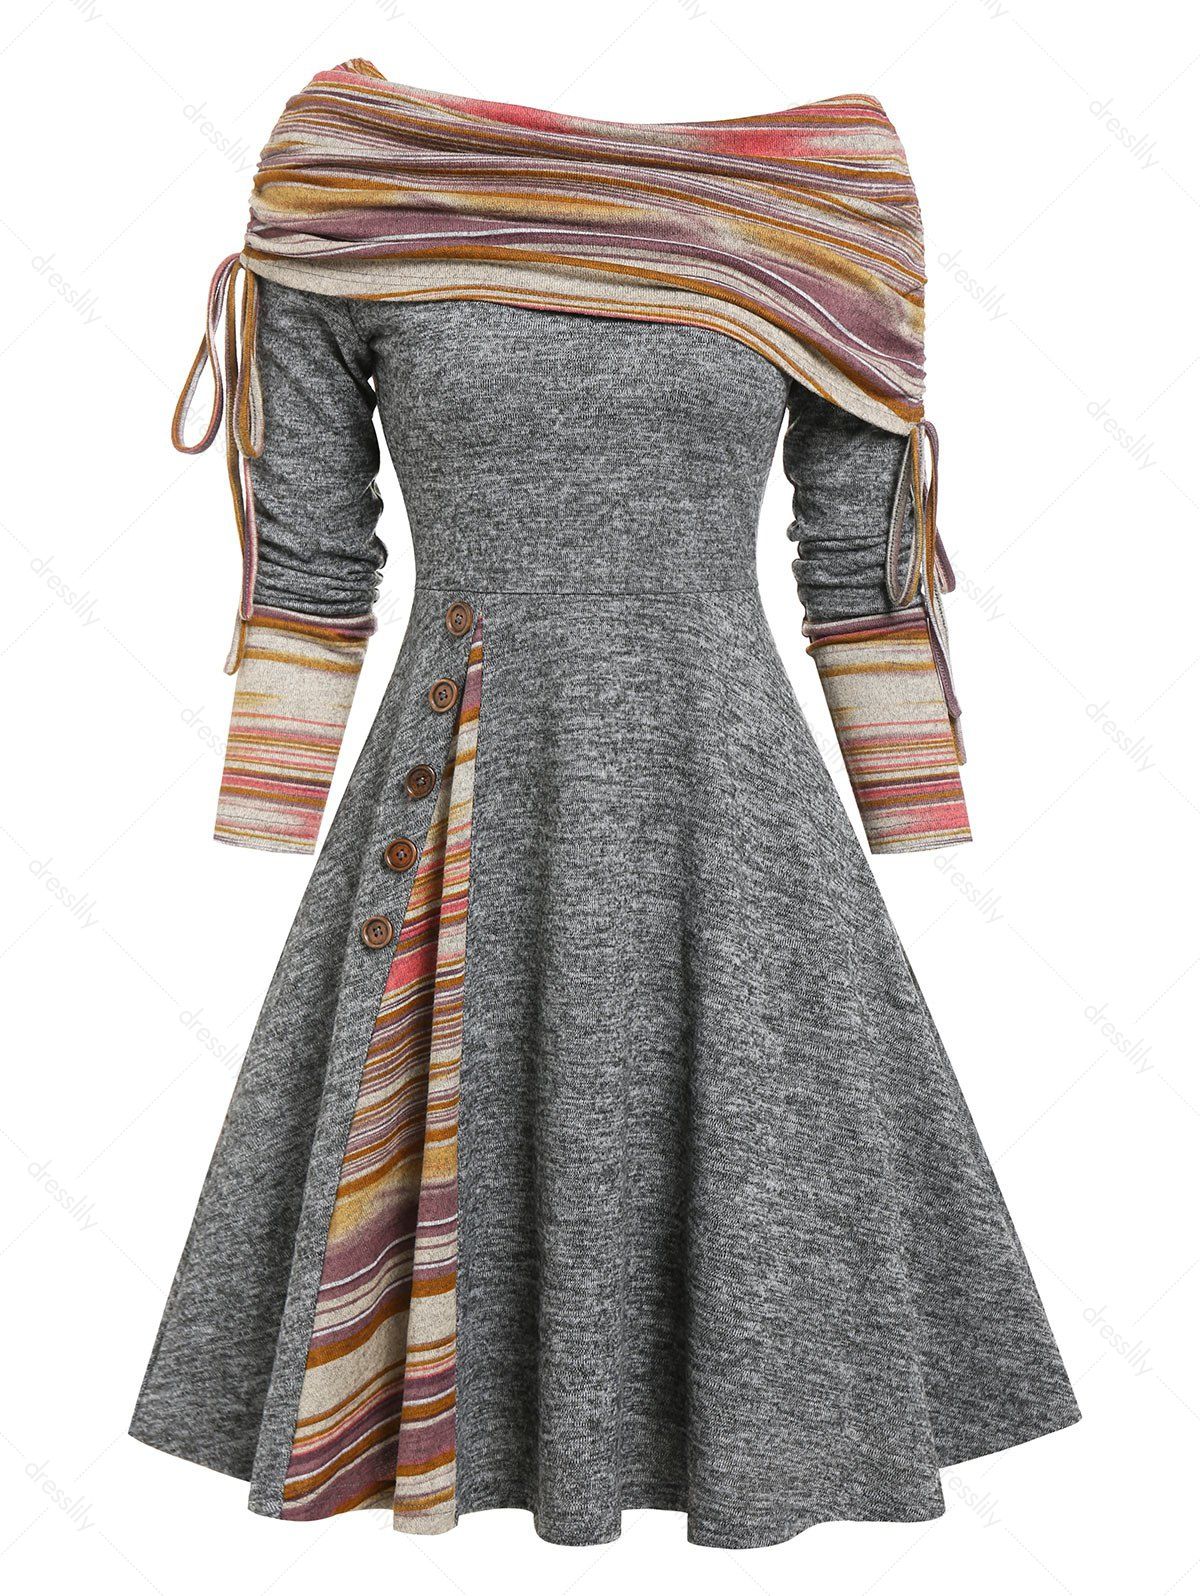 Convertible Neck Cinched Striped Flare A Line Dress - LIGHT GRAY L